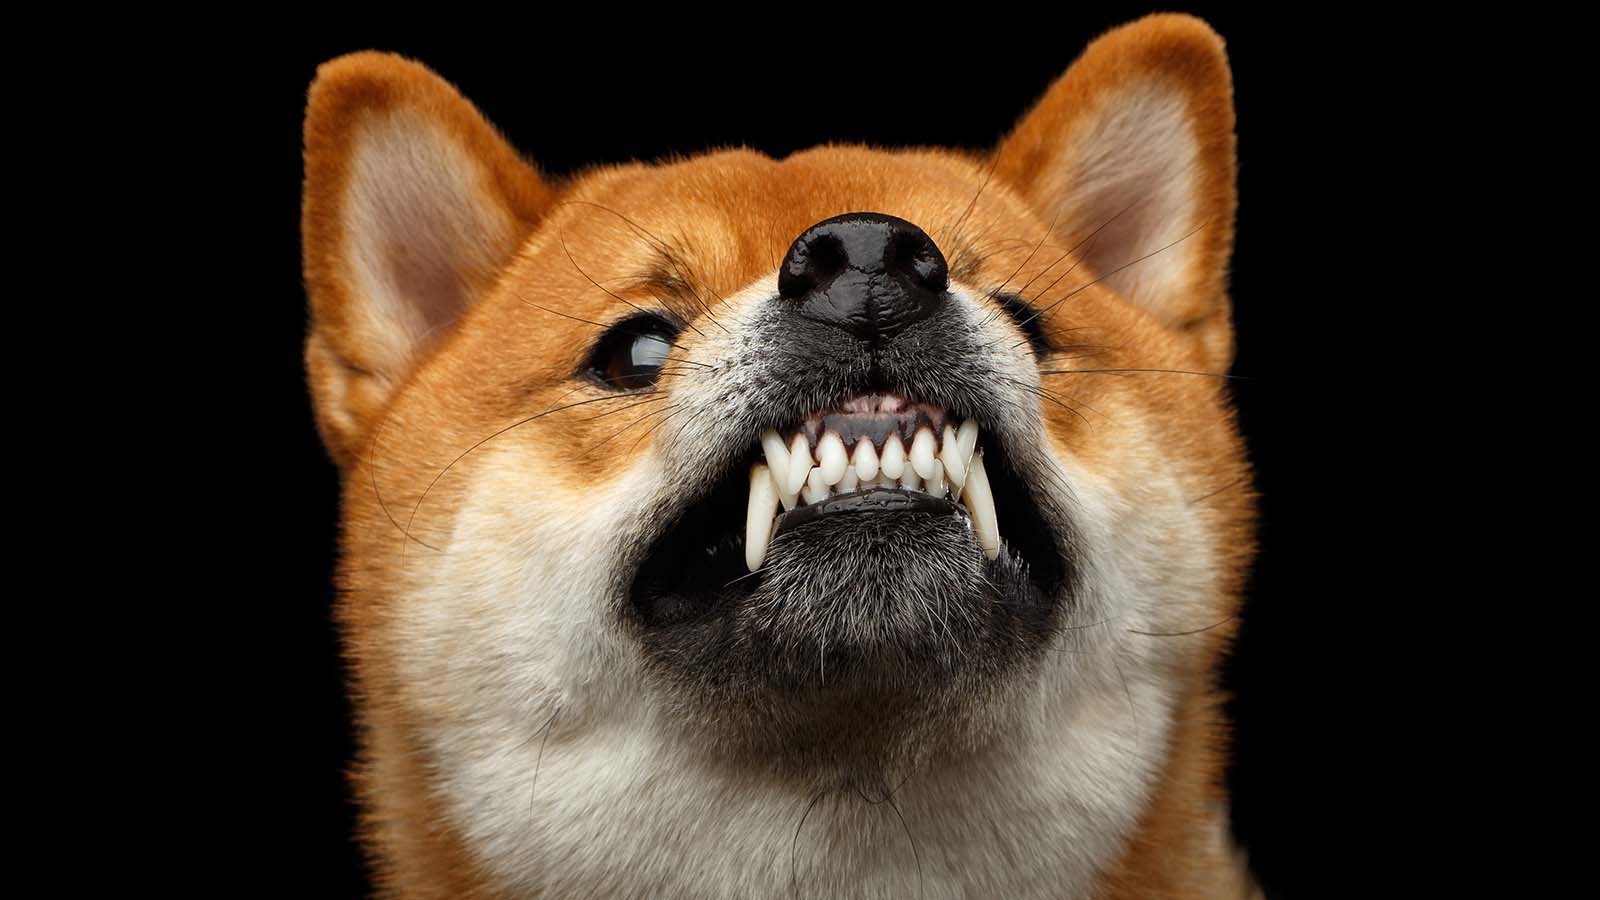 $500,000 worth of Shiba tokens burned after burning portal launch 3